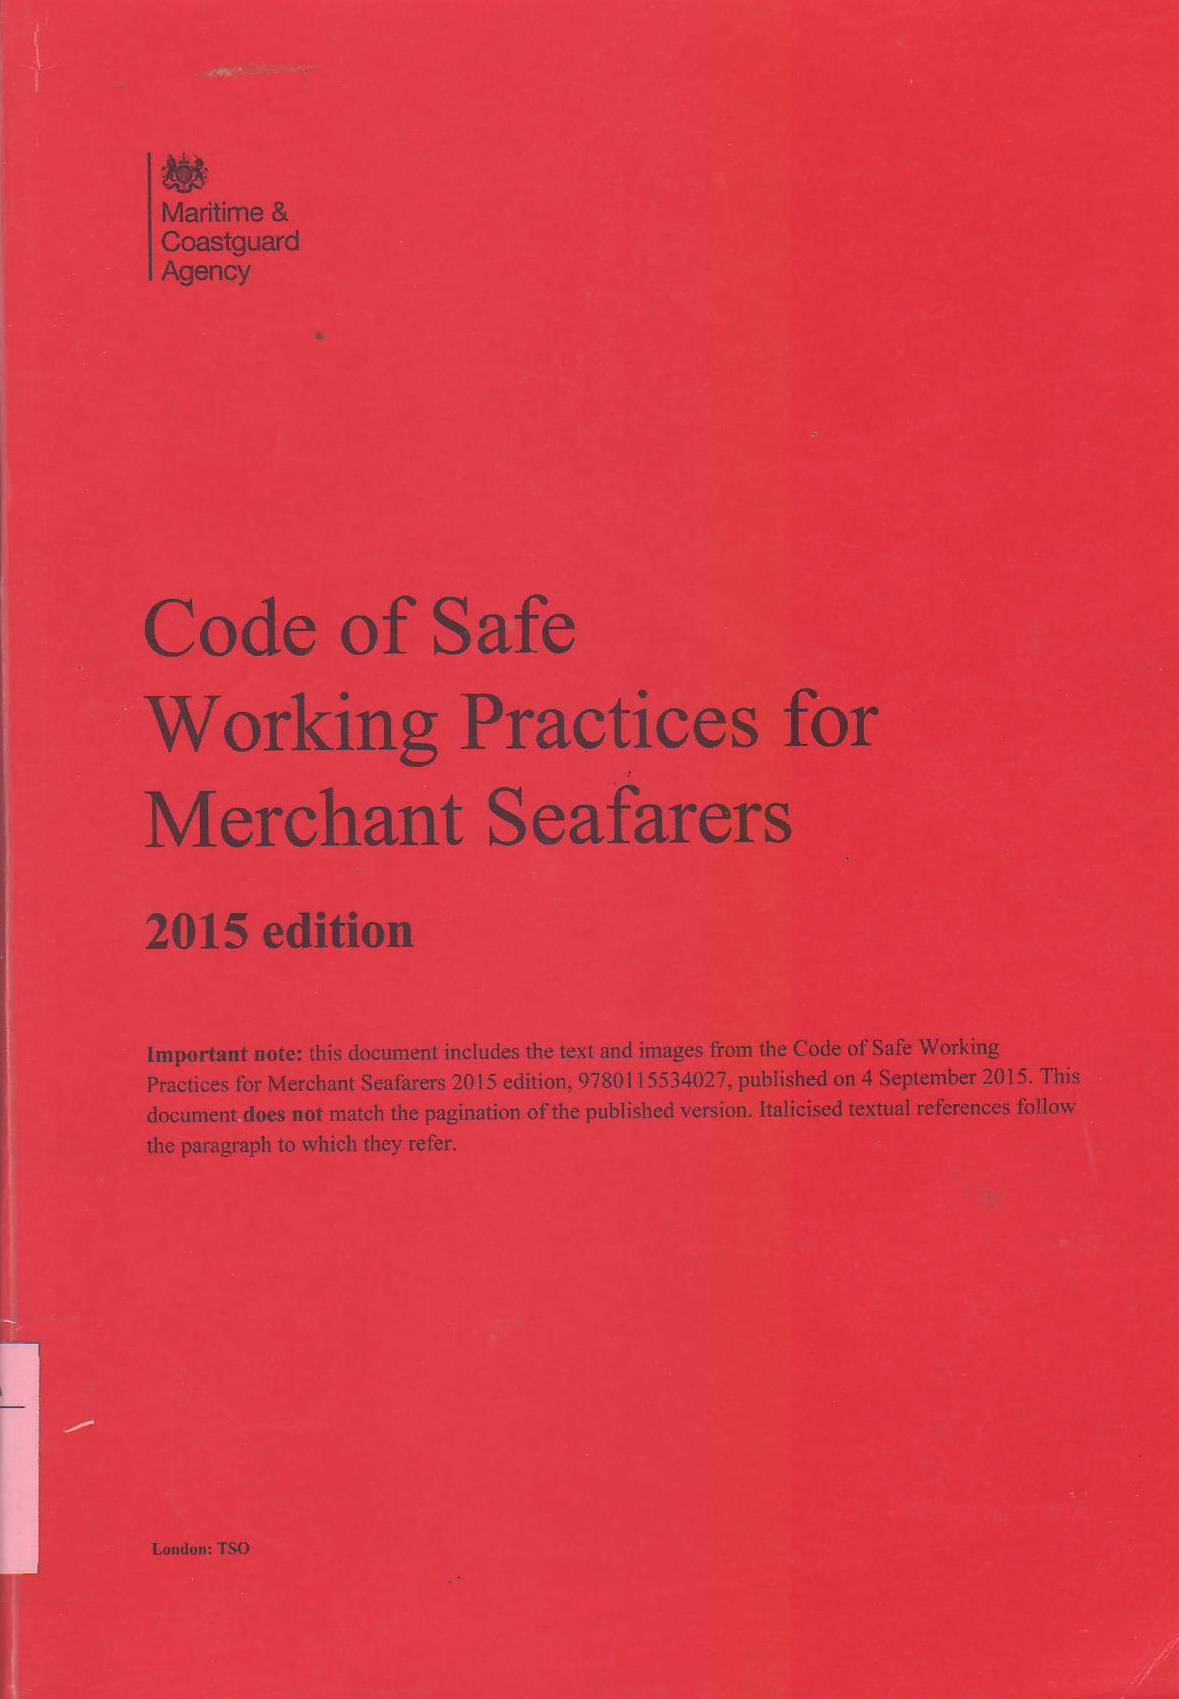 Code of Safe Working Practices for Merchant Seafarers